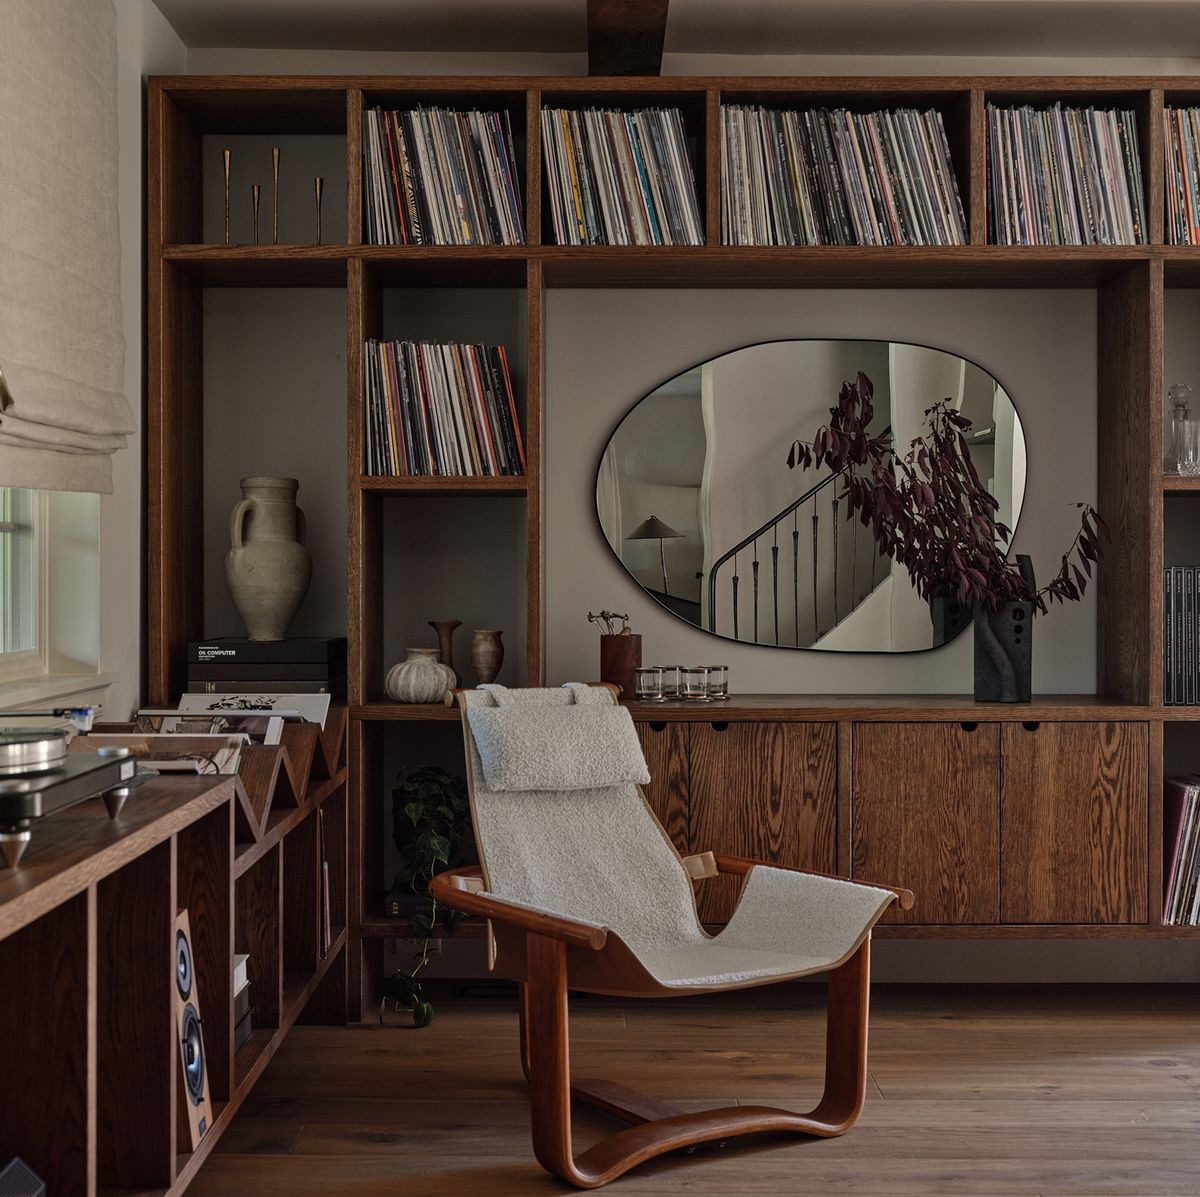 sitting area with chair and shelves filled with records